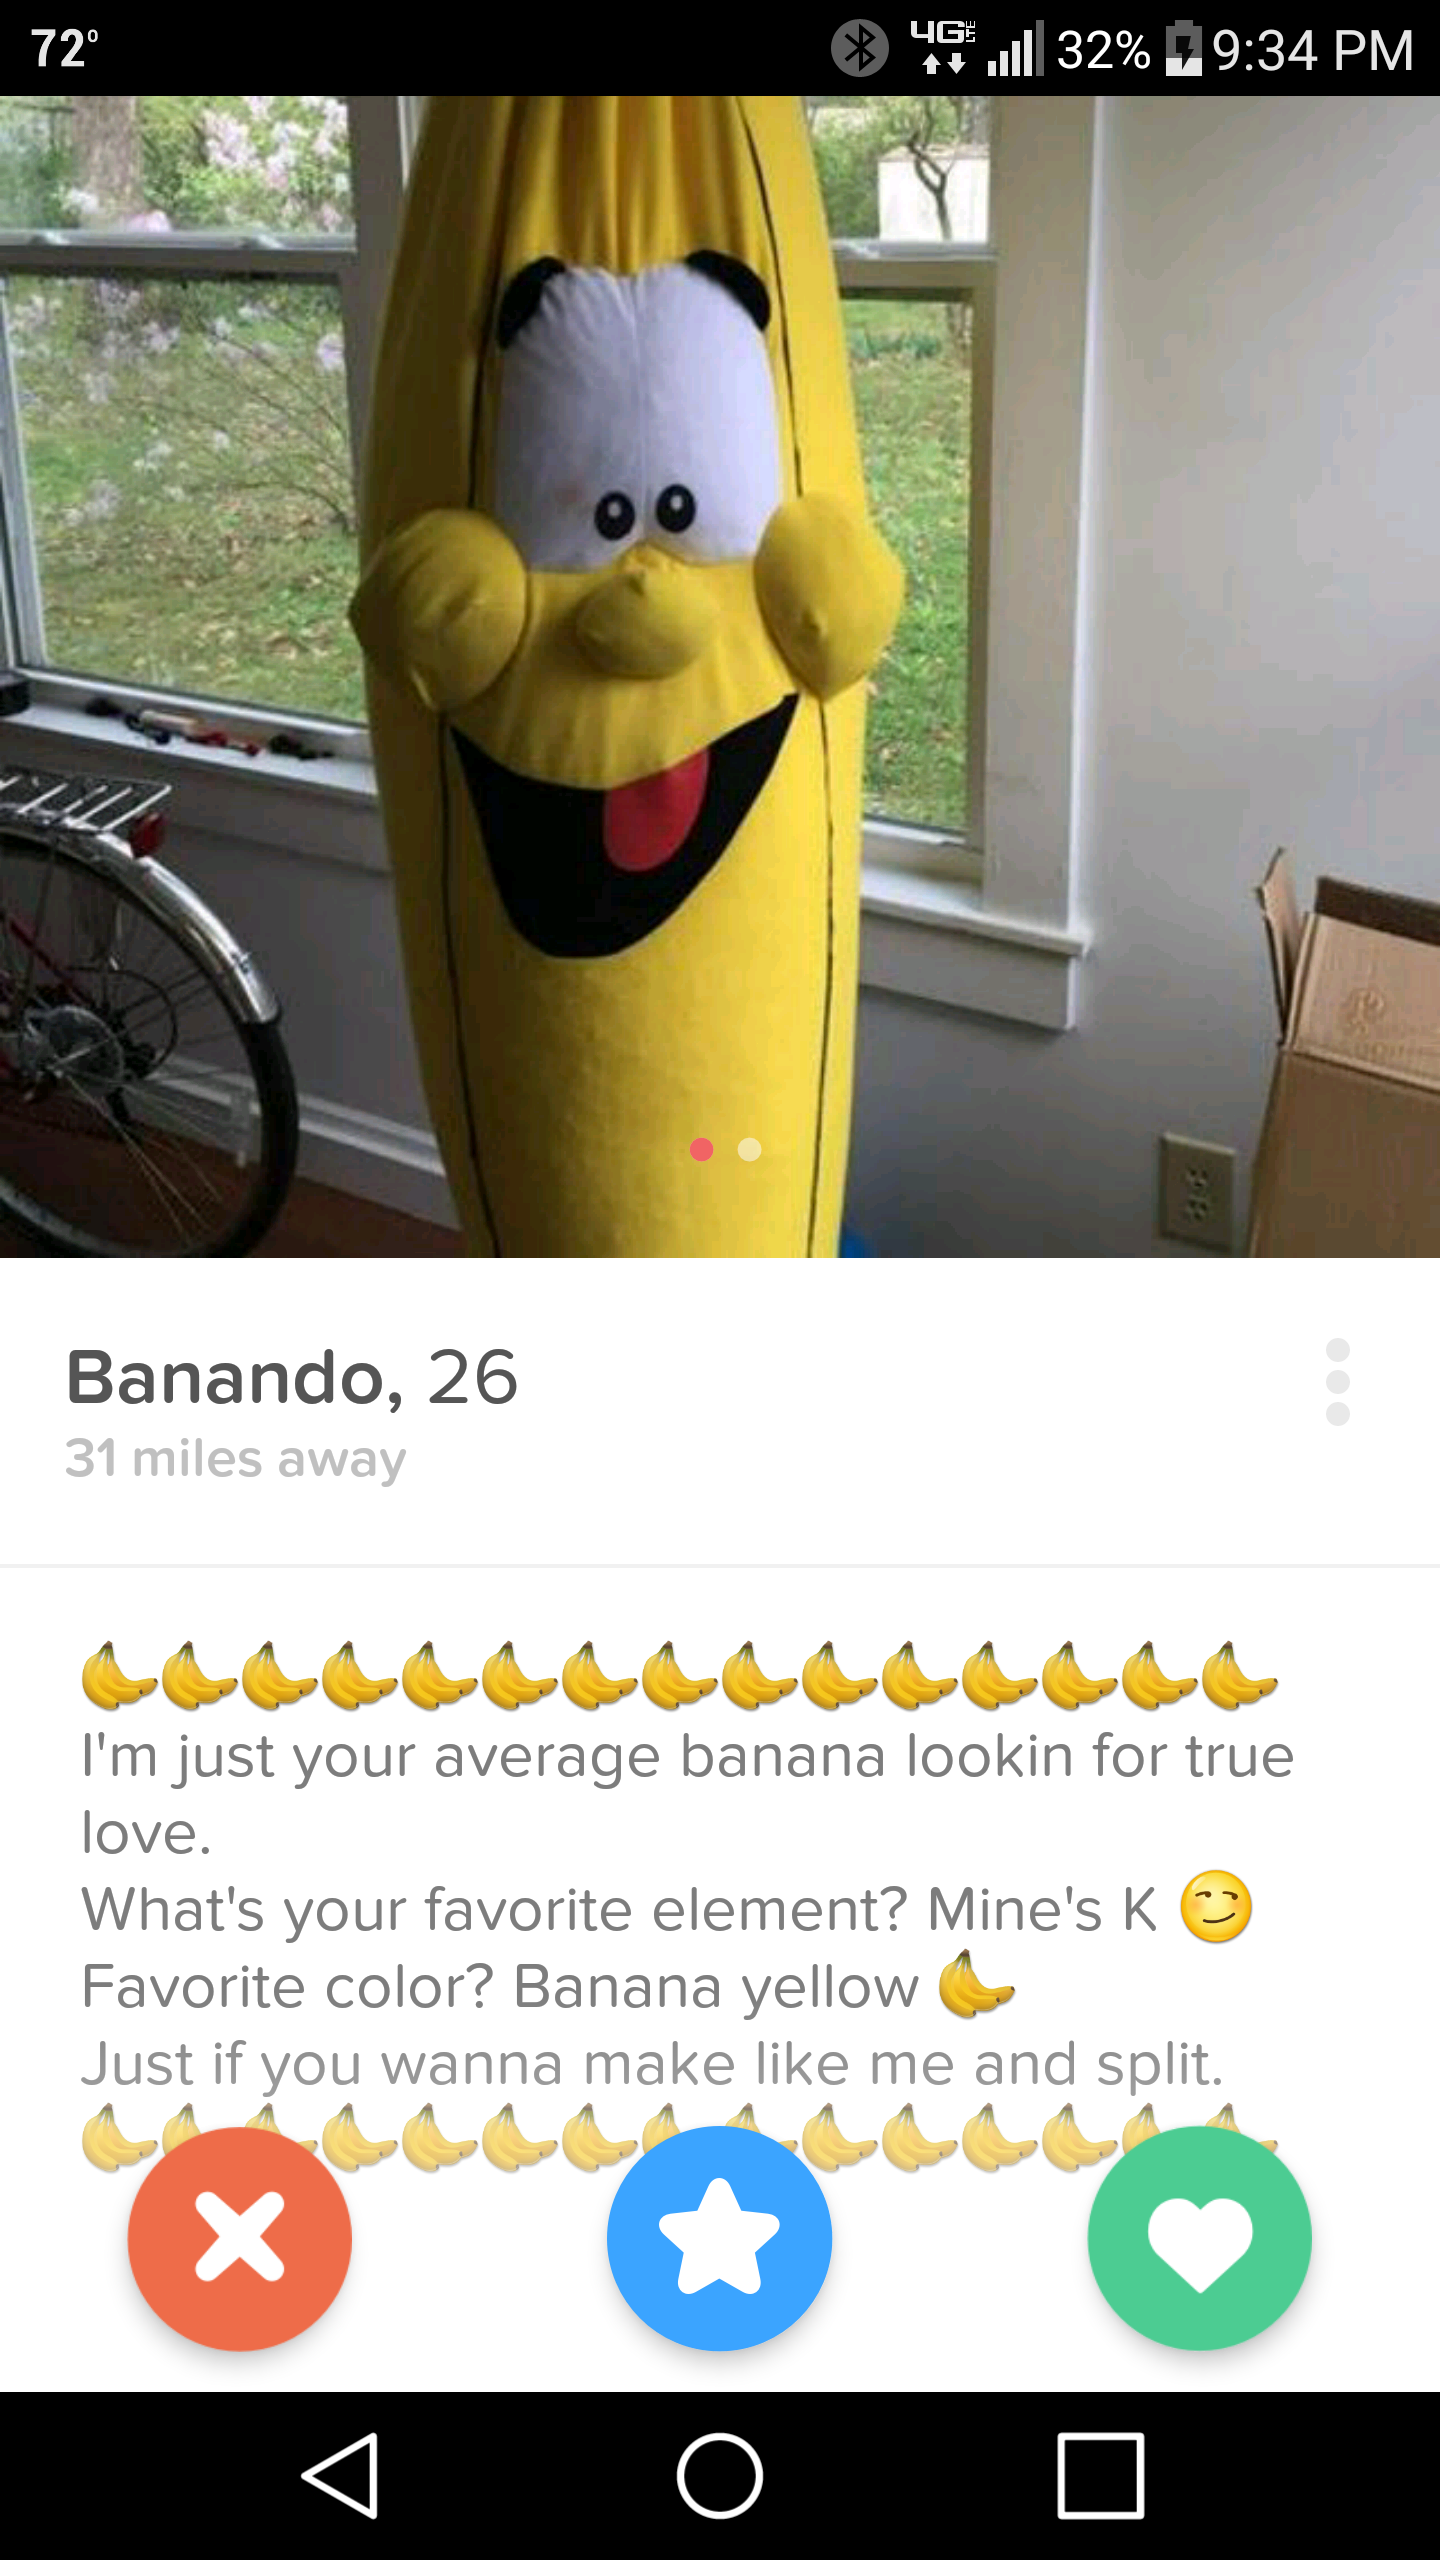 i m a vegetarian but my pussy aint - 32% Banando, 26 31 miles away I'm just your average banana lookin for true love. What's your favorite element? Mine's K Favorite color? Banana yellow Just if you wanna make me and split Just if you 0